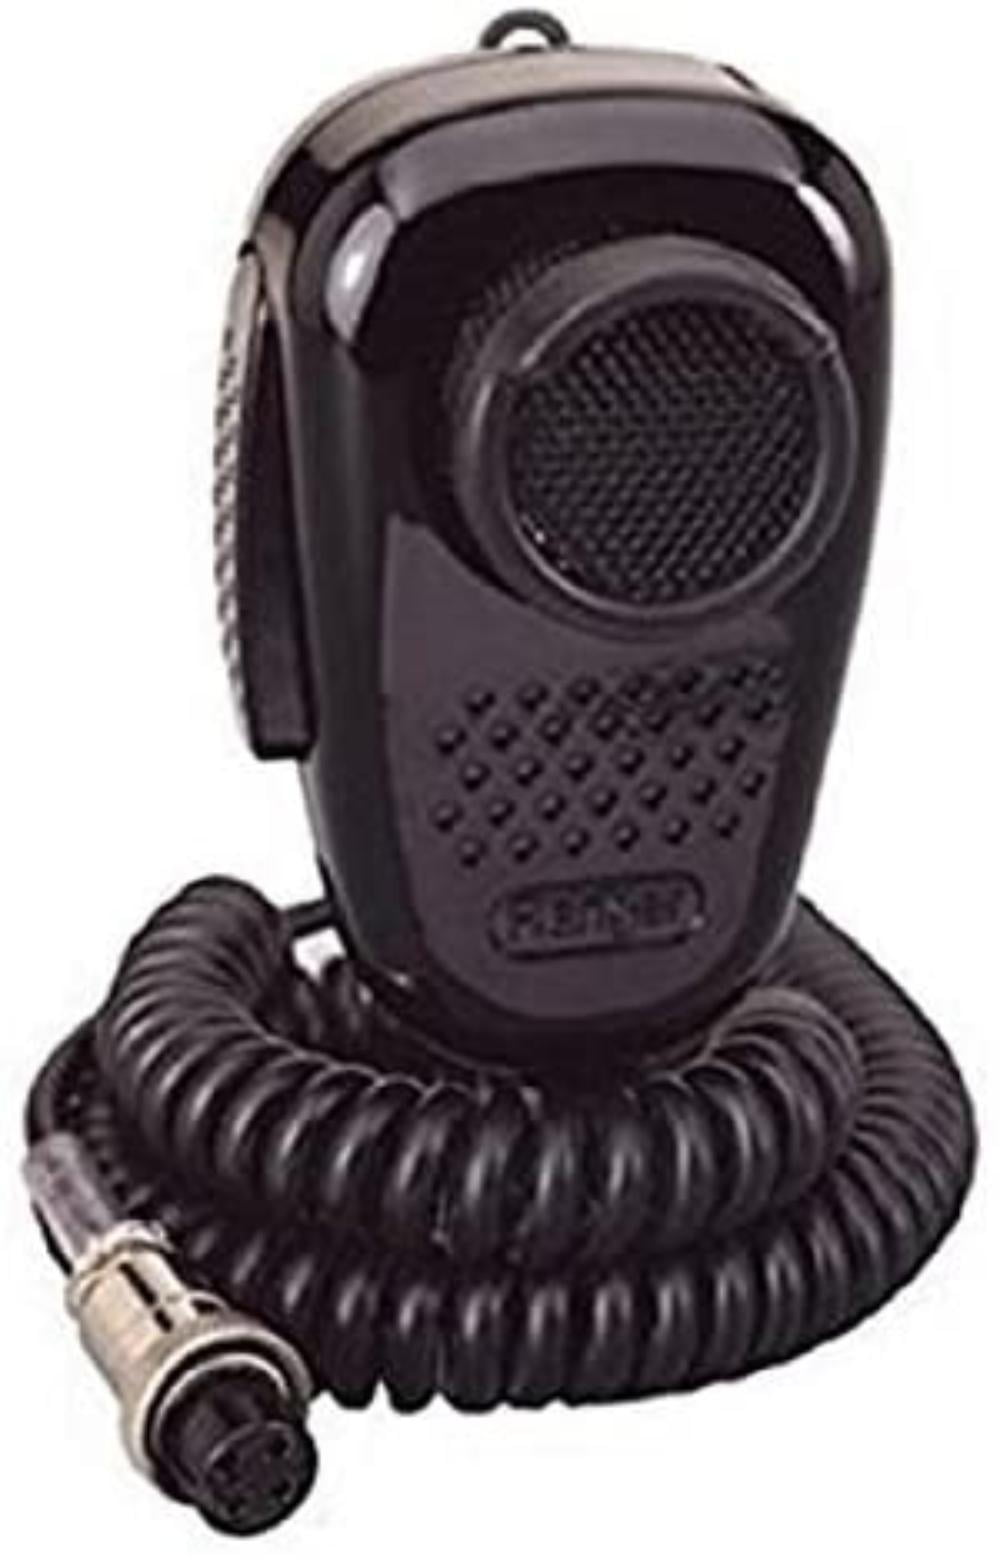 SRA-198 BLACK NOISE CANCELLING MICROPHONE WIRED 4-PIN CB Radio RANGER 